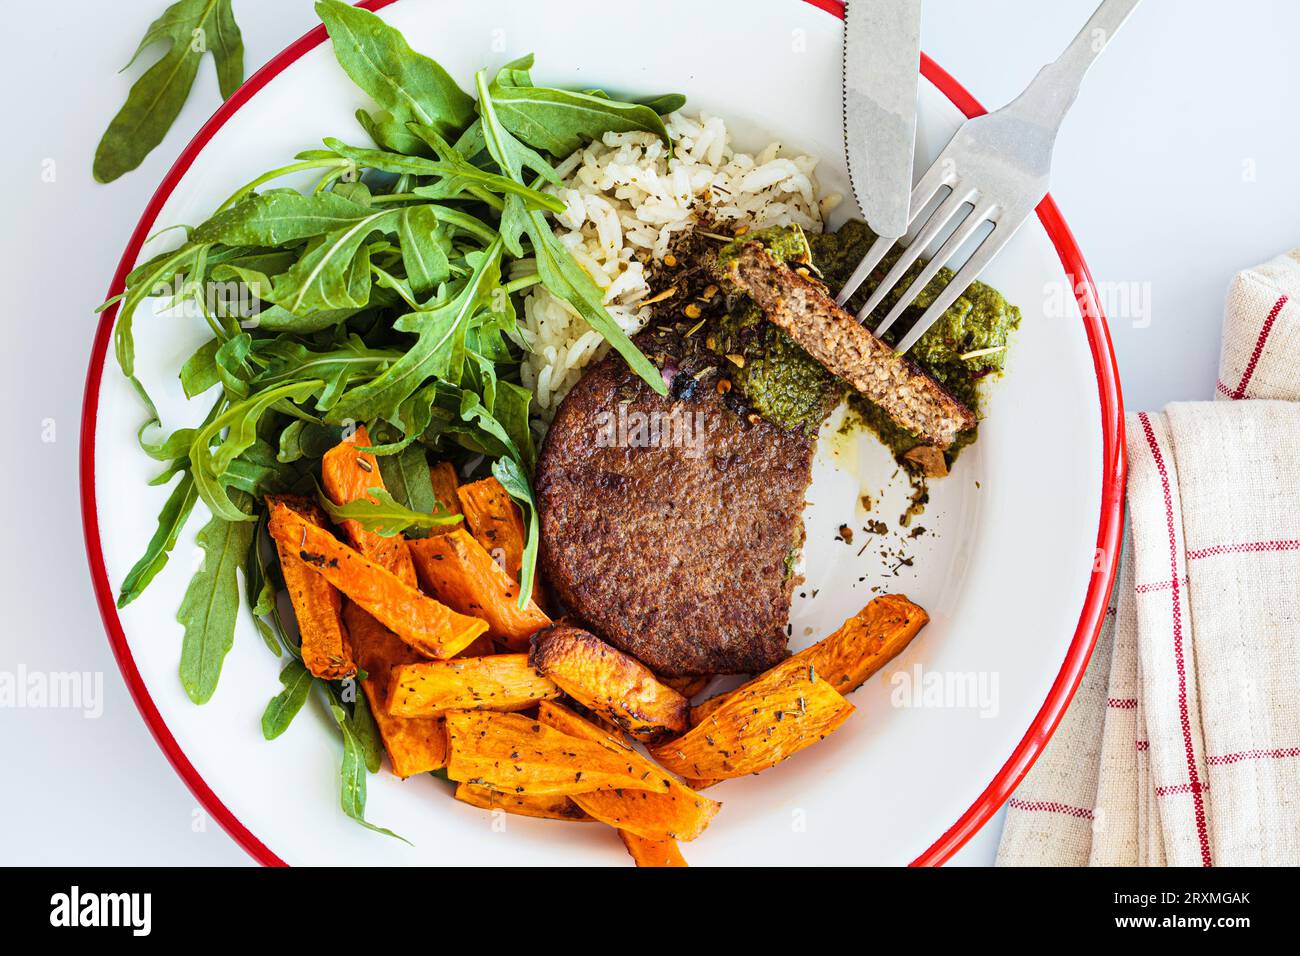 Vegan meatless cutlet with pesto, baked sweet potato wedges, rice and salad, white background, top view. Stock Photo